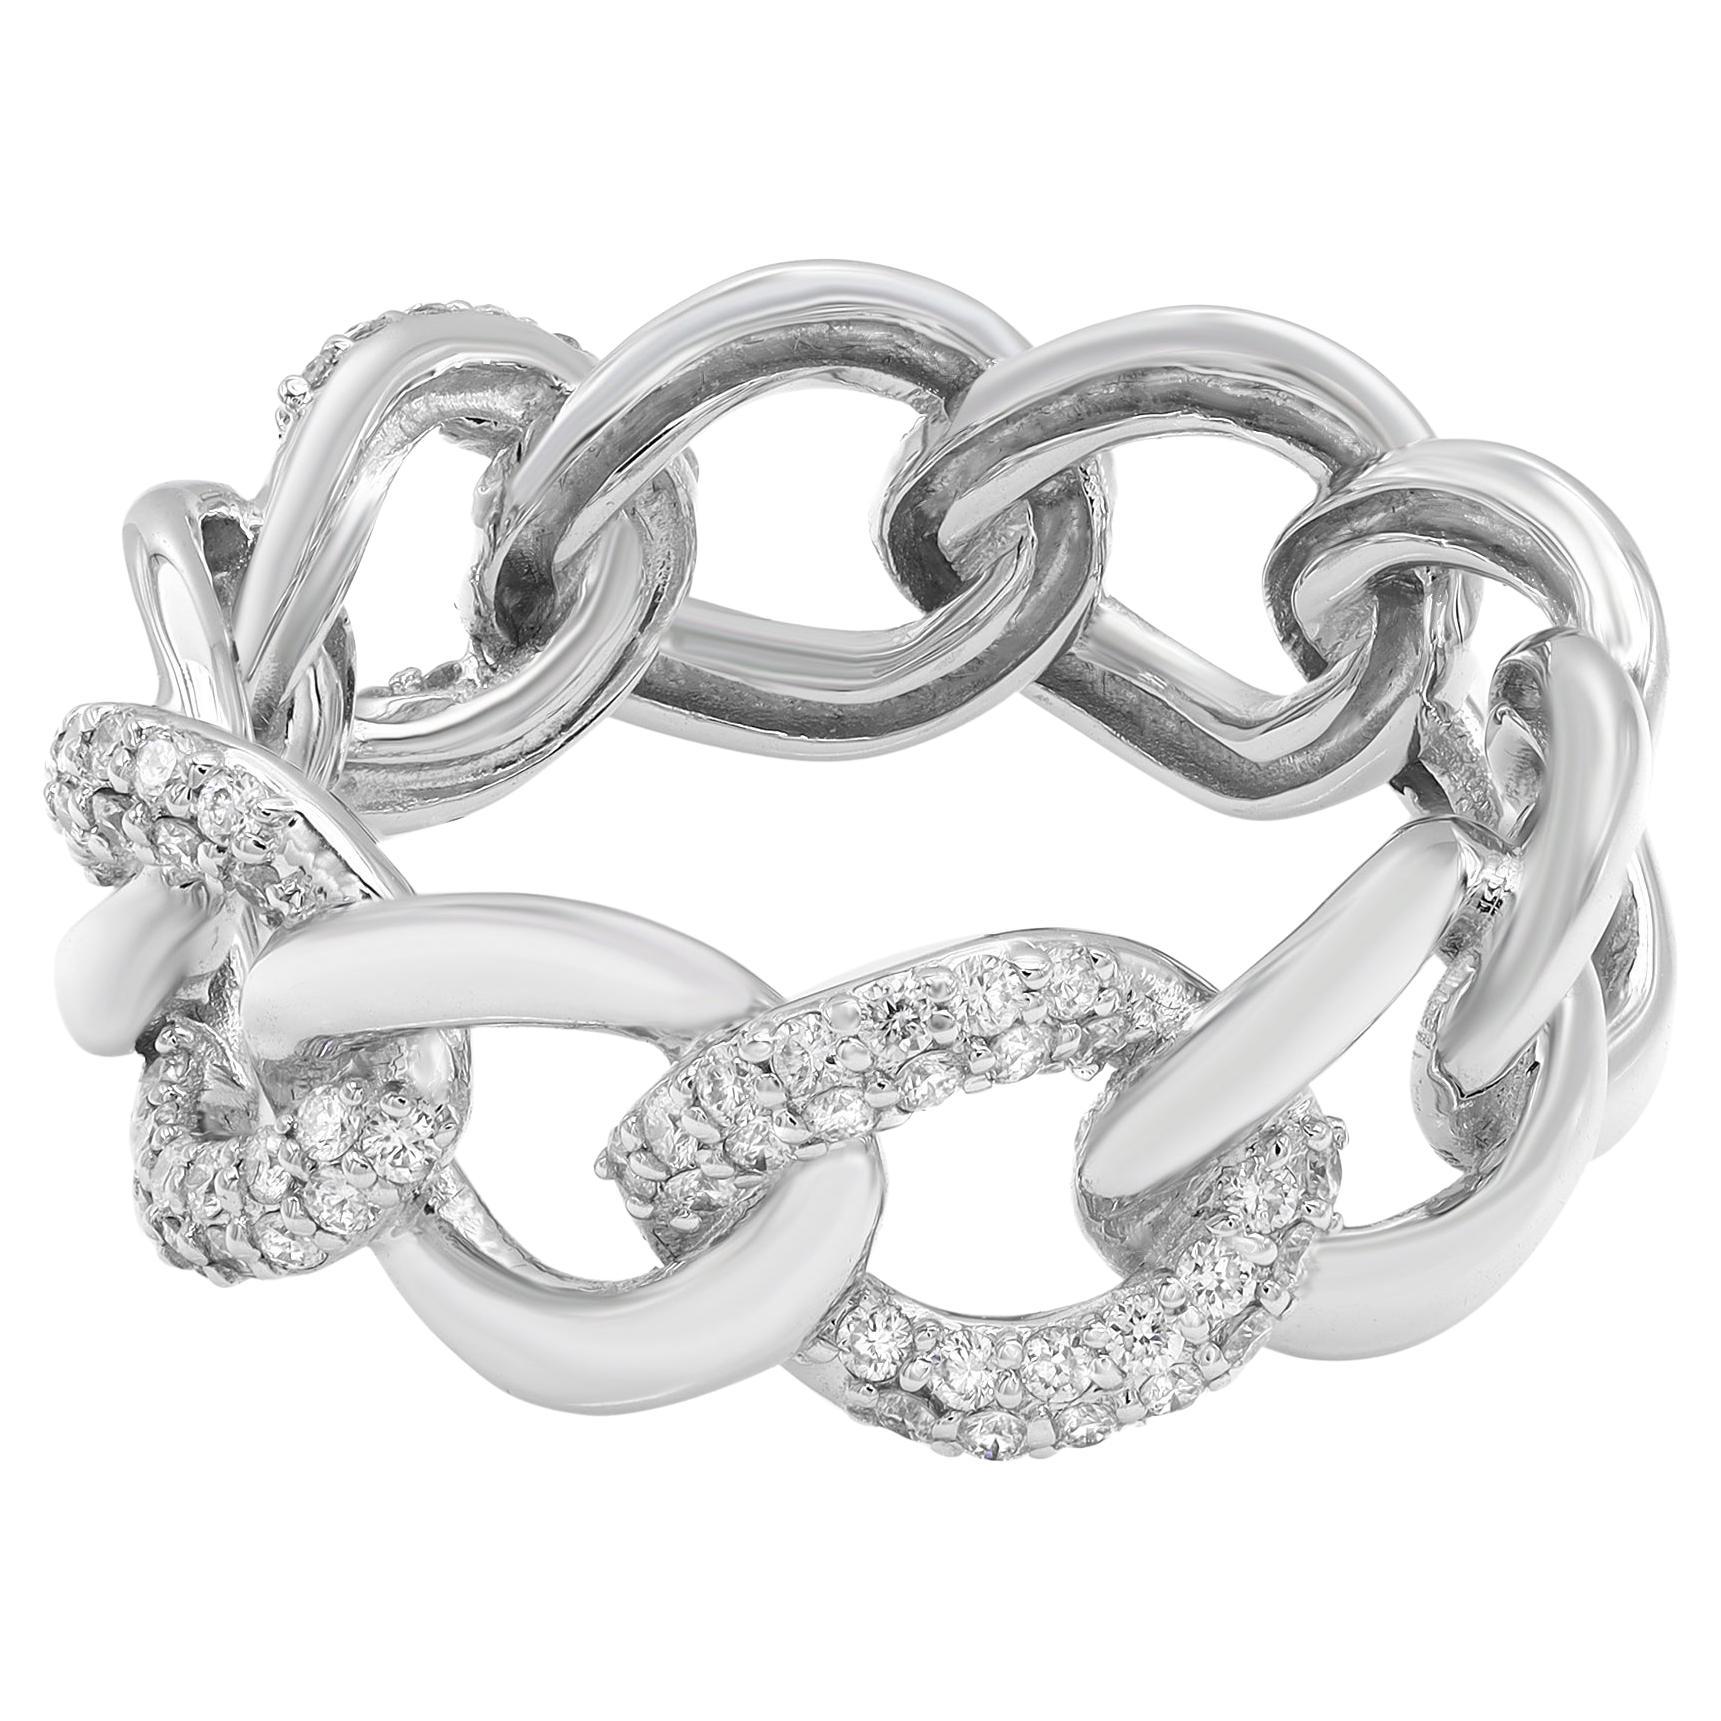 Pave Set Round Cut Diamond Chain Link Ring Band 18K White Gold 0.39cttw For Sale